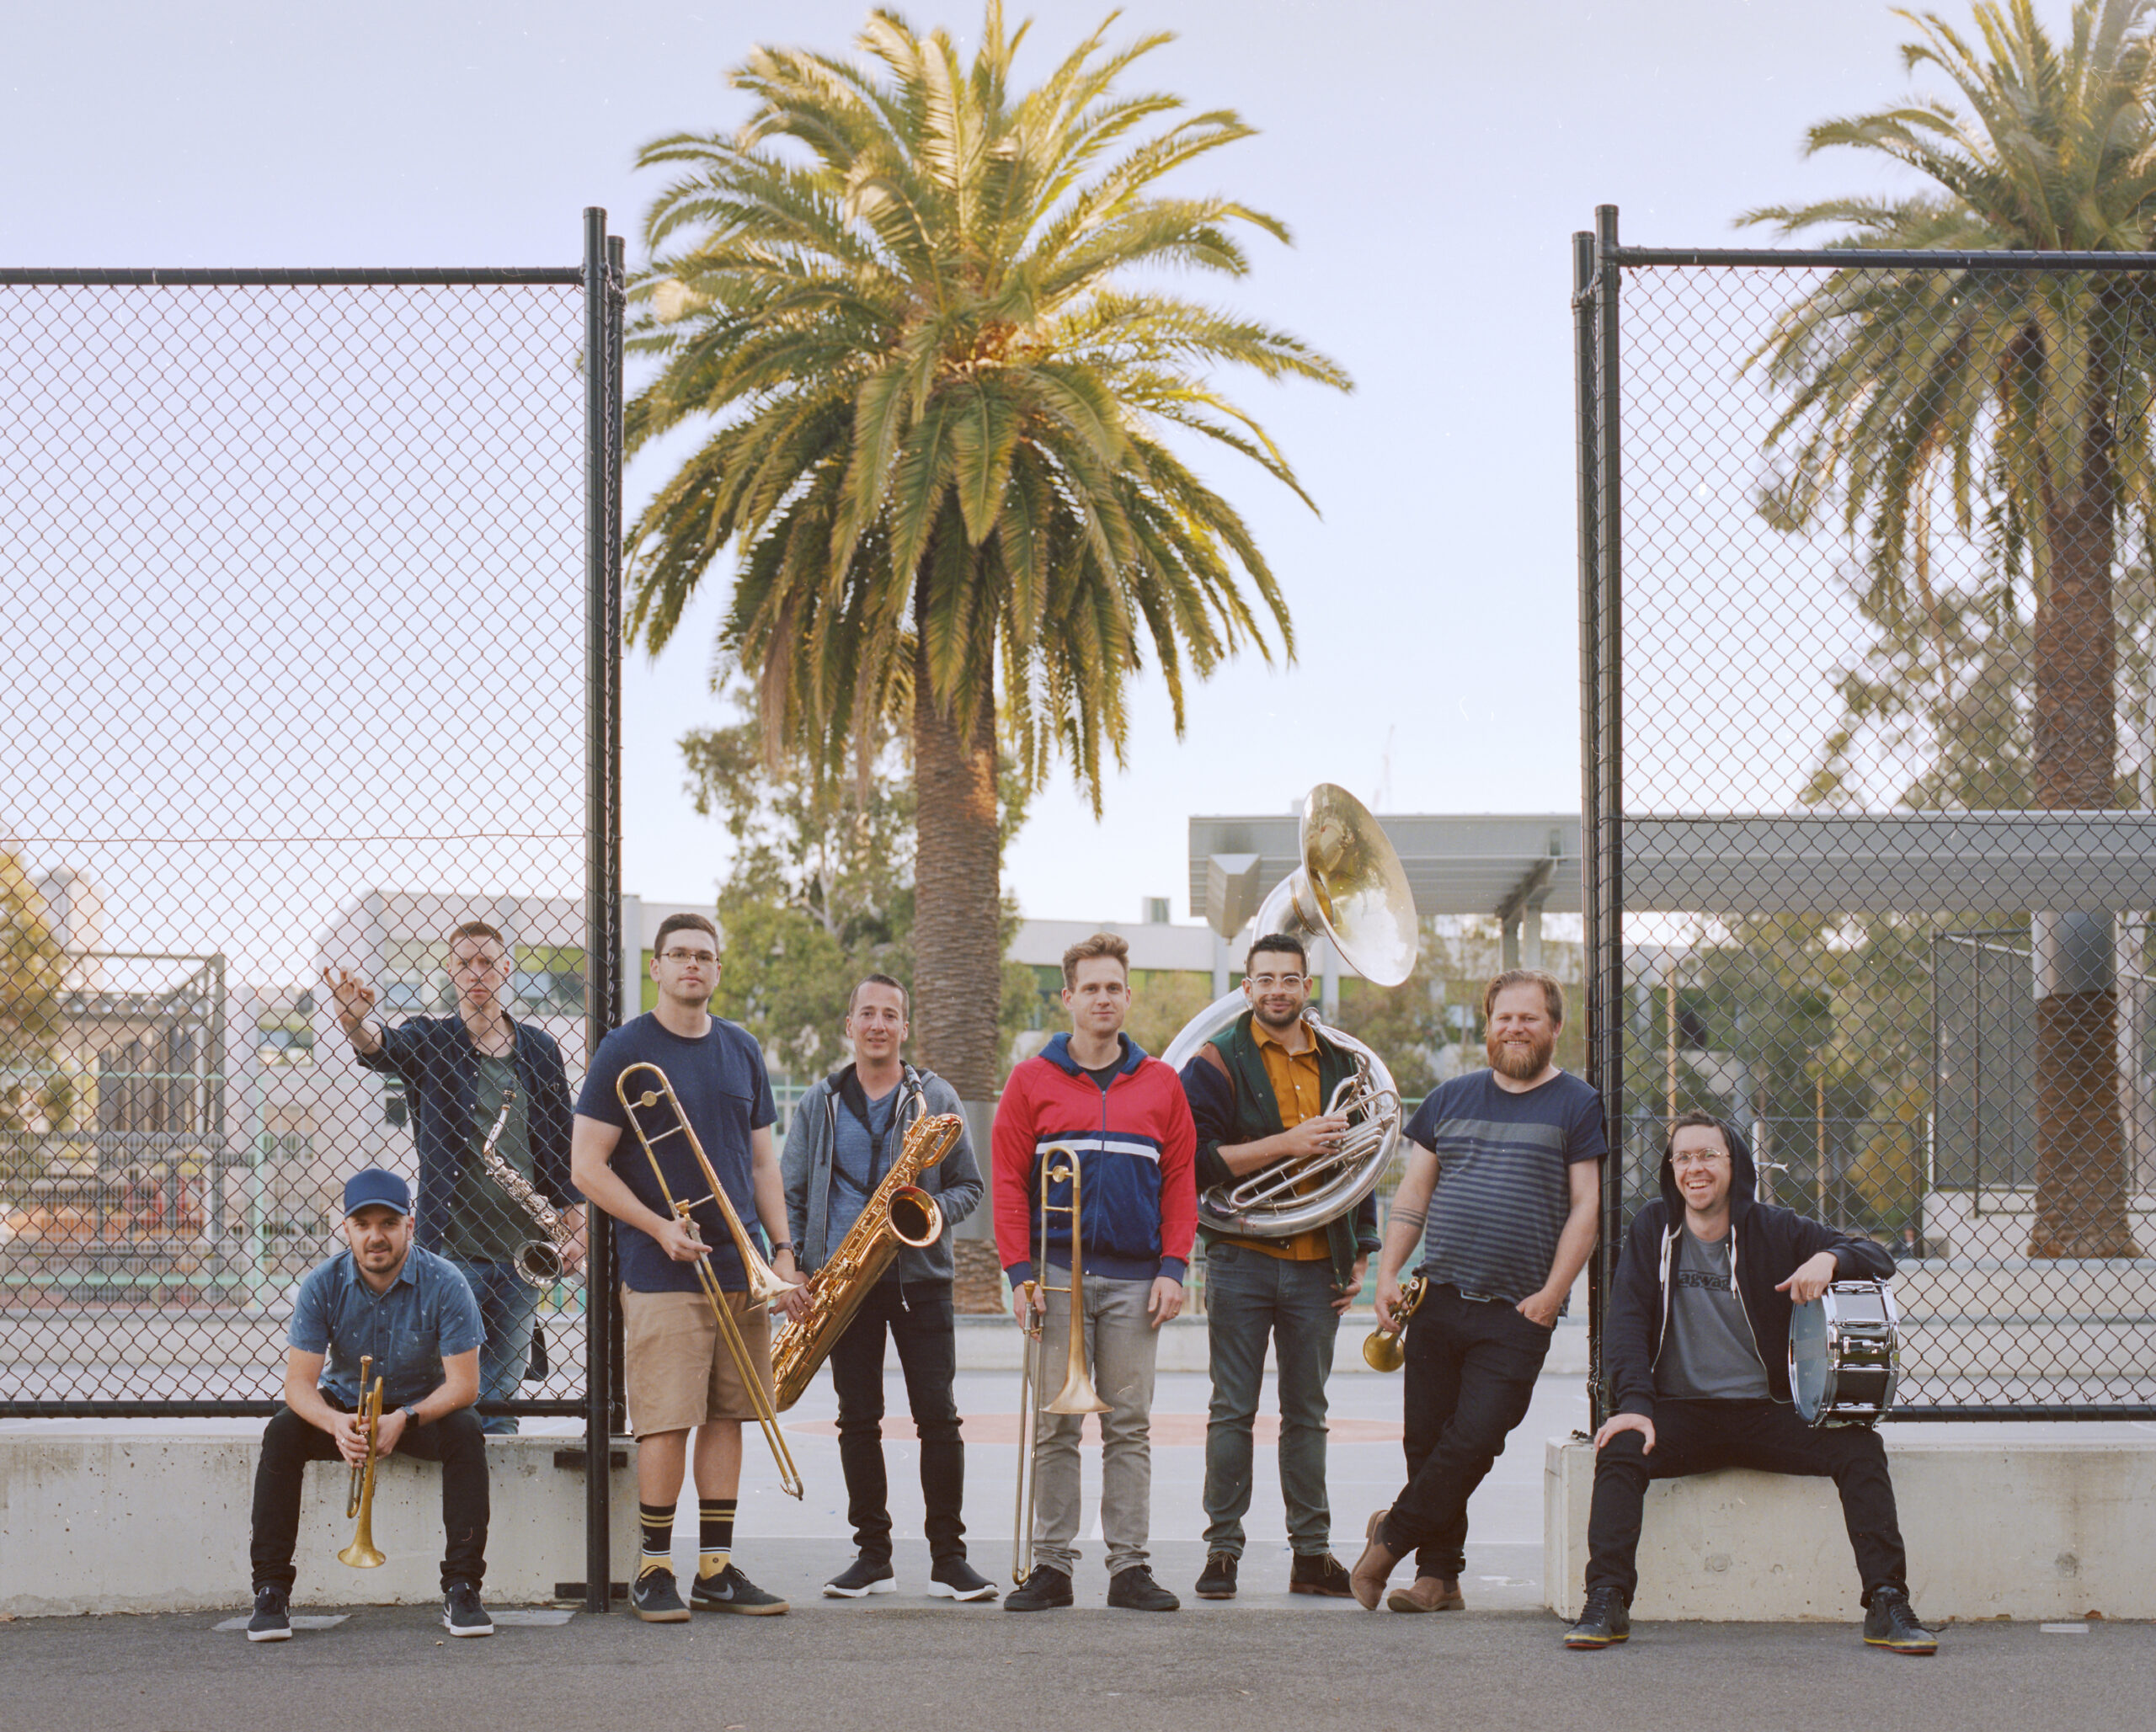 eight musicians holding brass instruments so against a chain linked fence that surrounds a basketball court. Palm trees tower int he background.